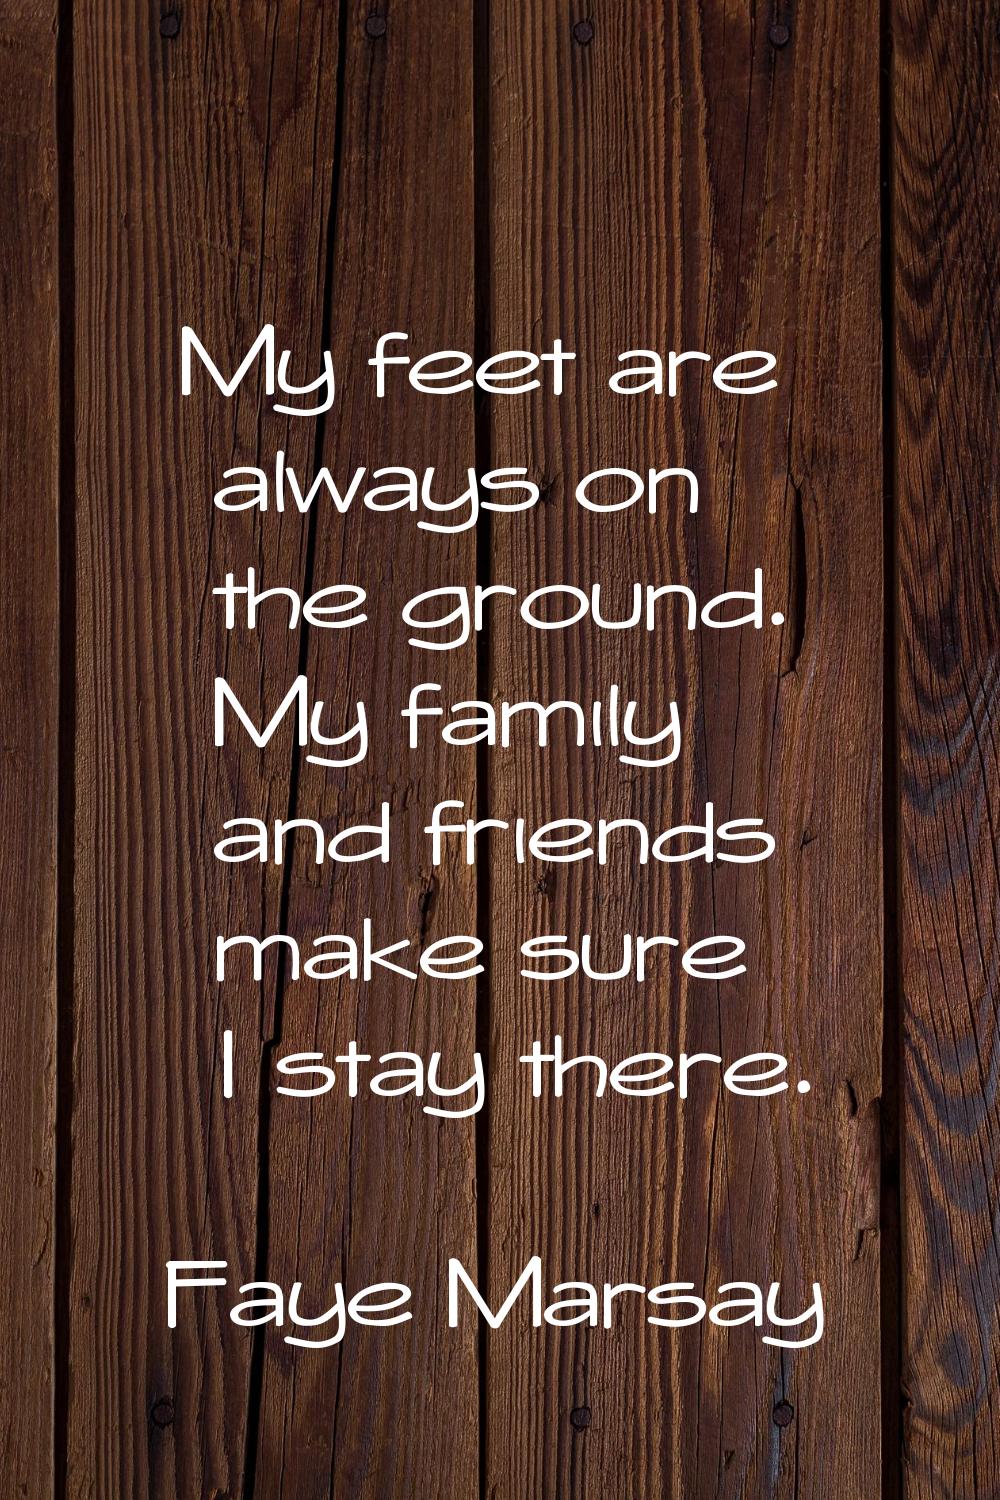 My feet are always on the ground. My family and friends make sure I stay there.